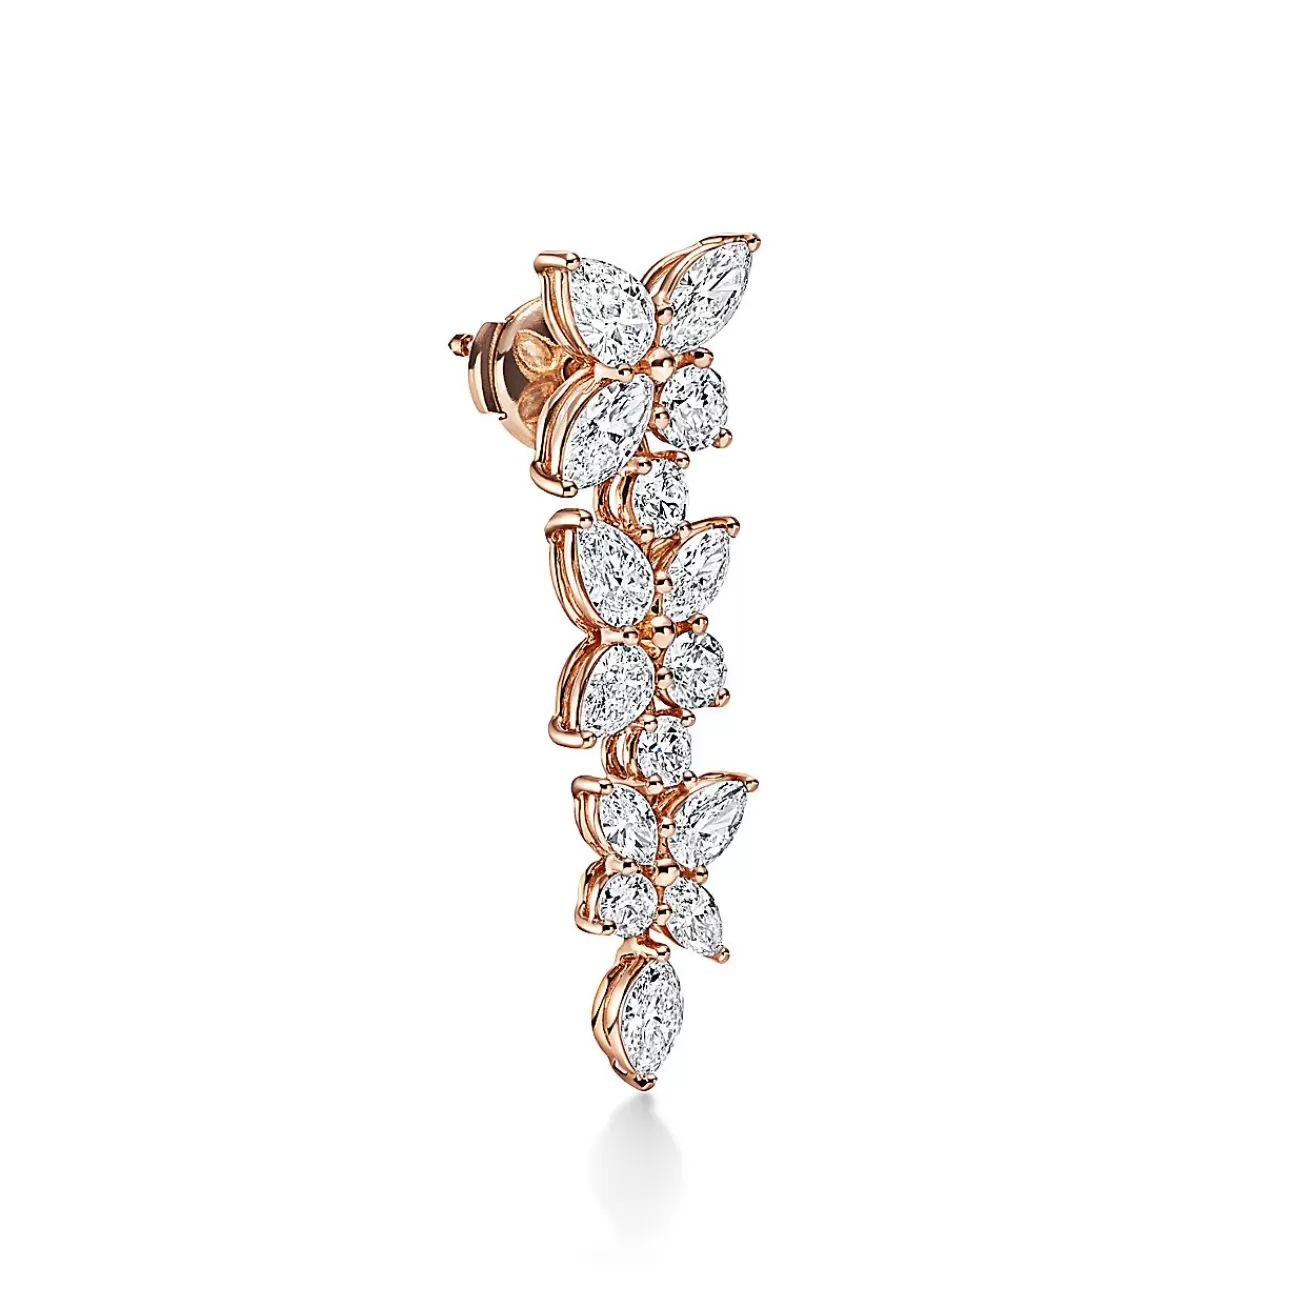 Tiffany & Co. Tiffany Victoria® mixed cluster diamond drop earrings in 18k rose gold. | ^ Earrings | Rose Gold Jewelry